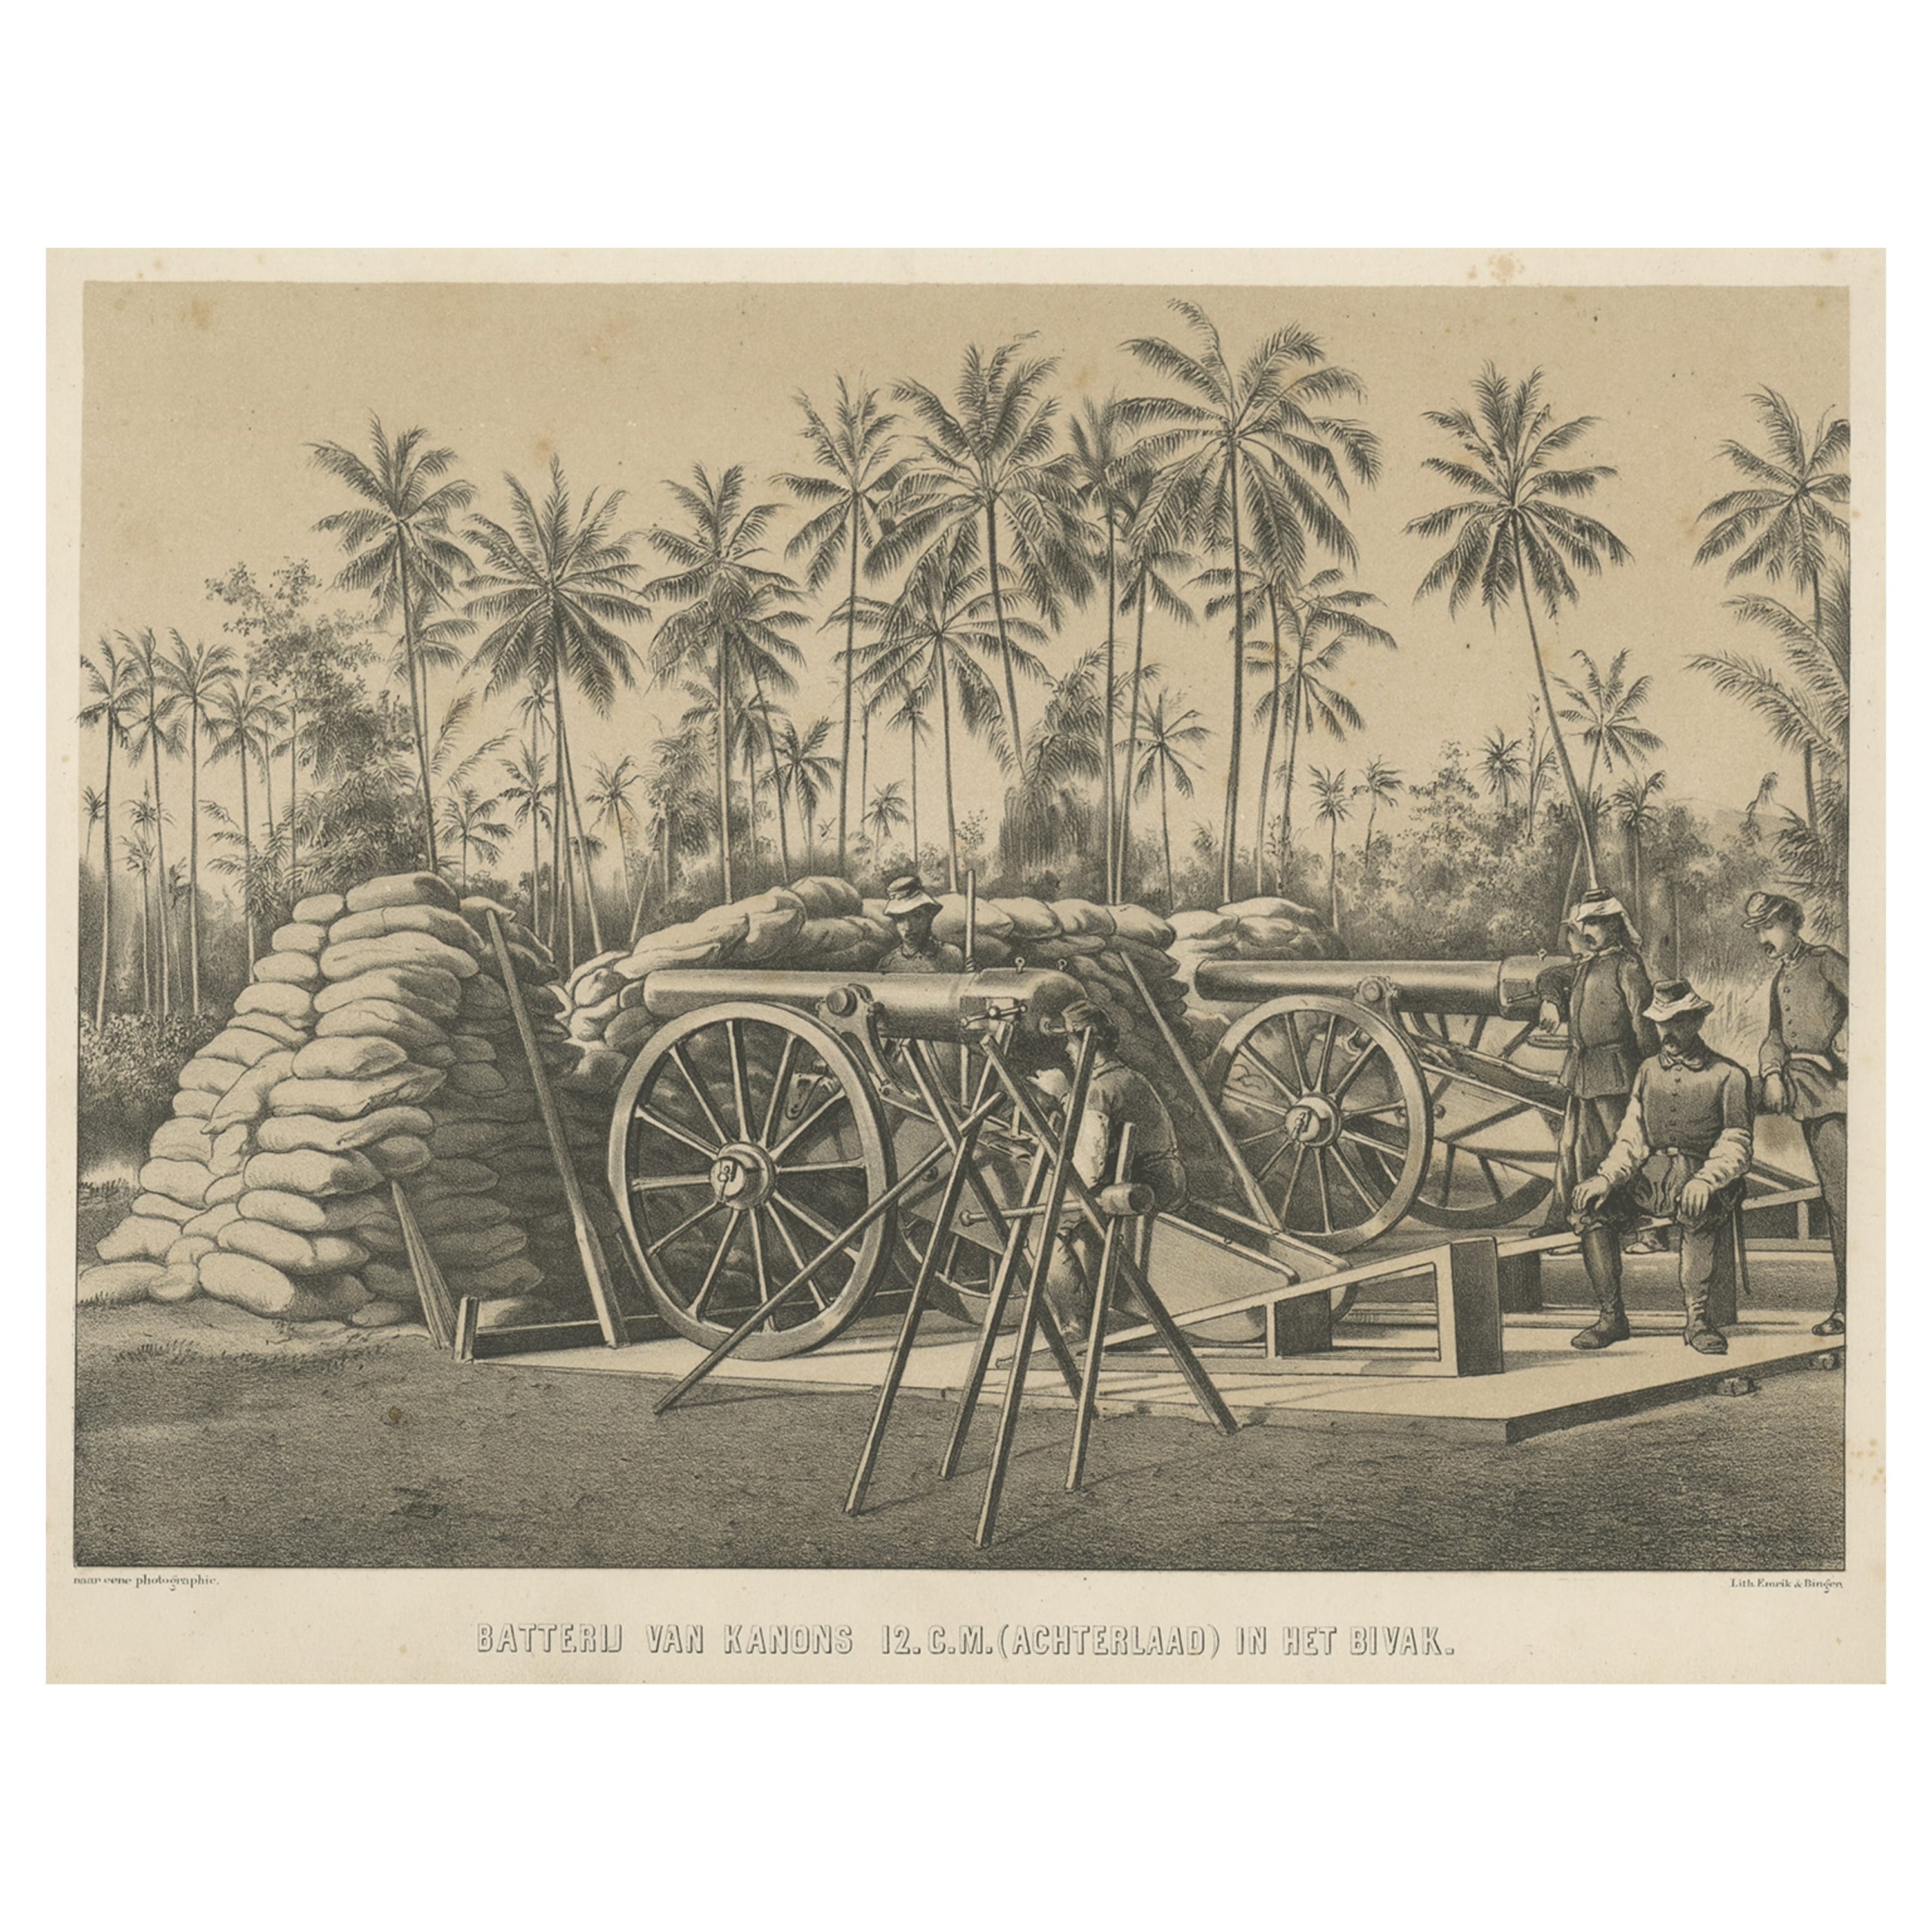 Antique Print Depicting a Military Scene with Canons, in Indonesia, 1784